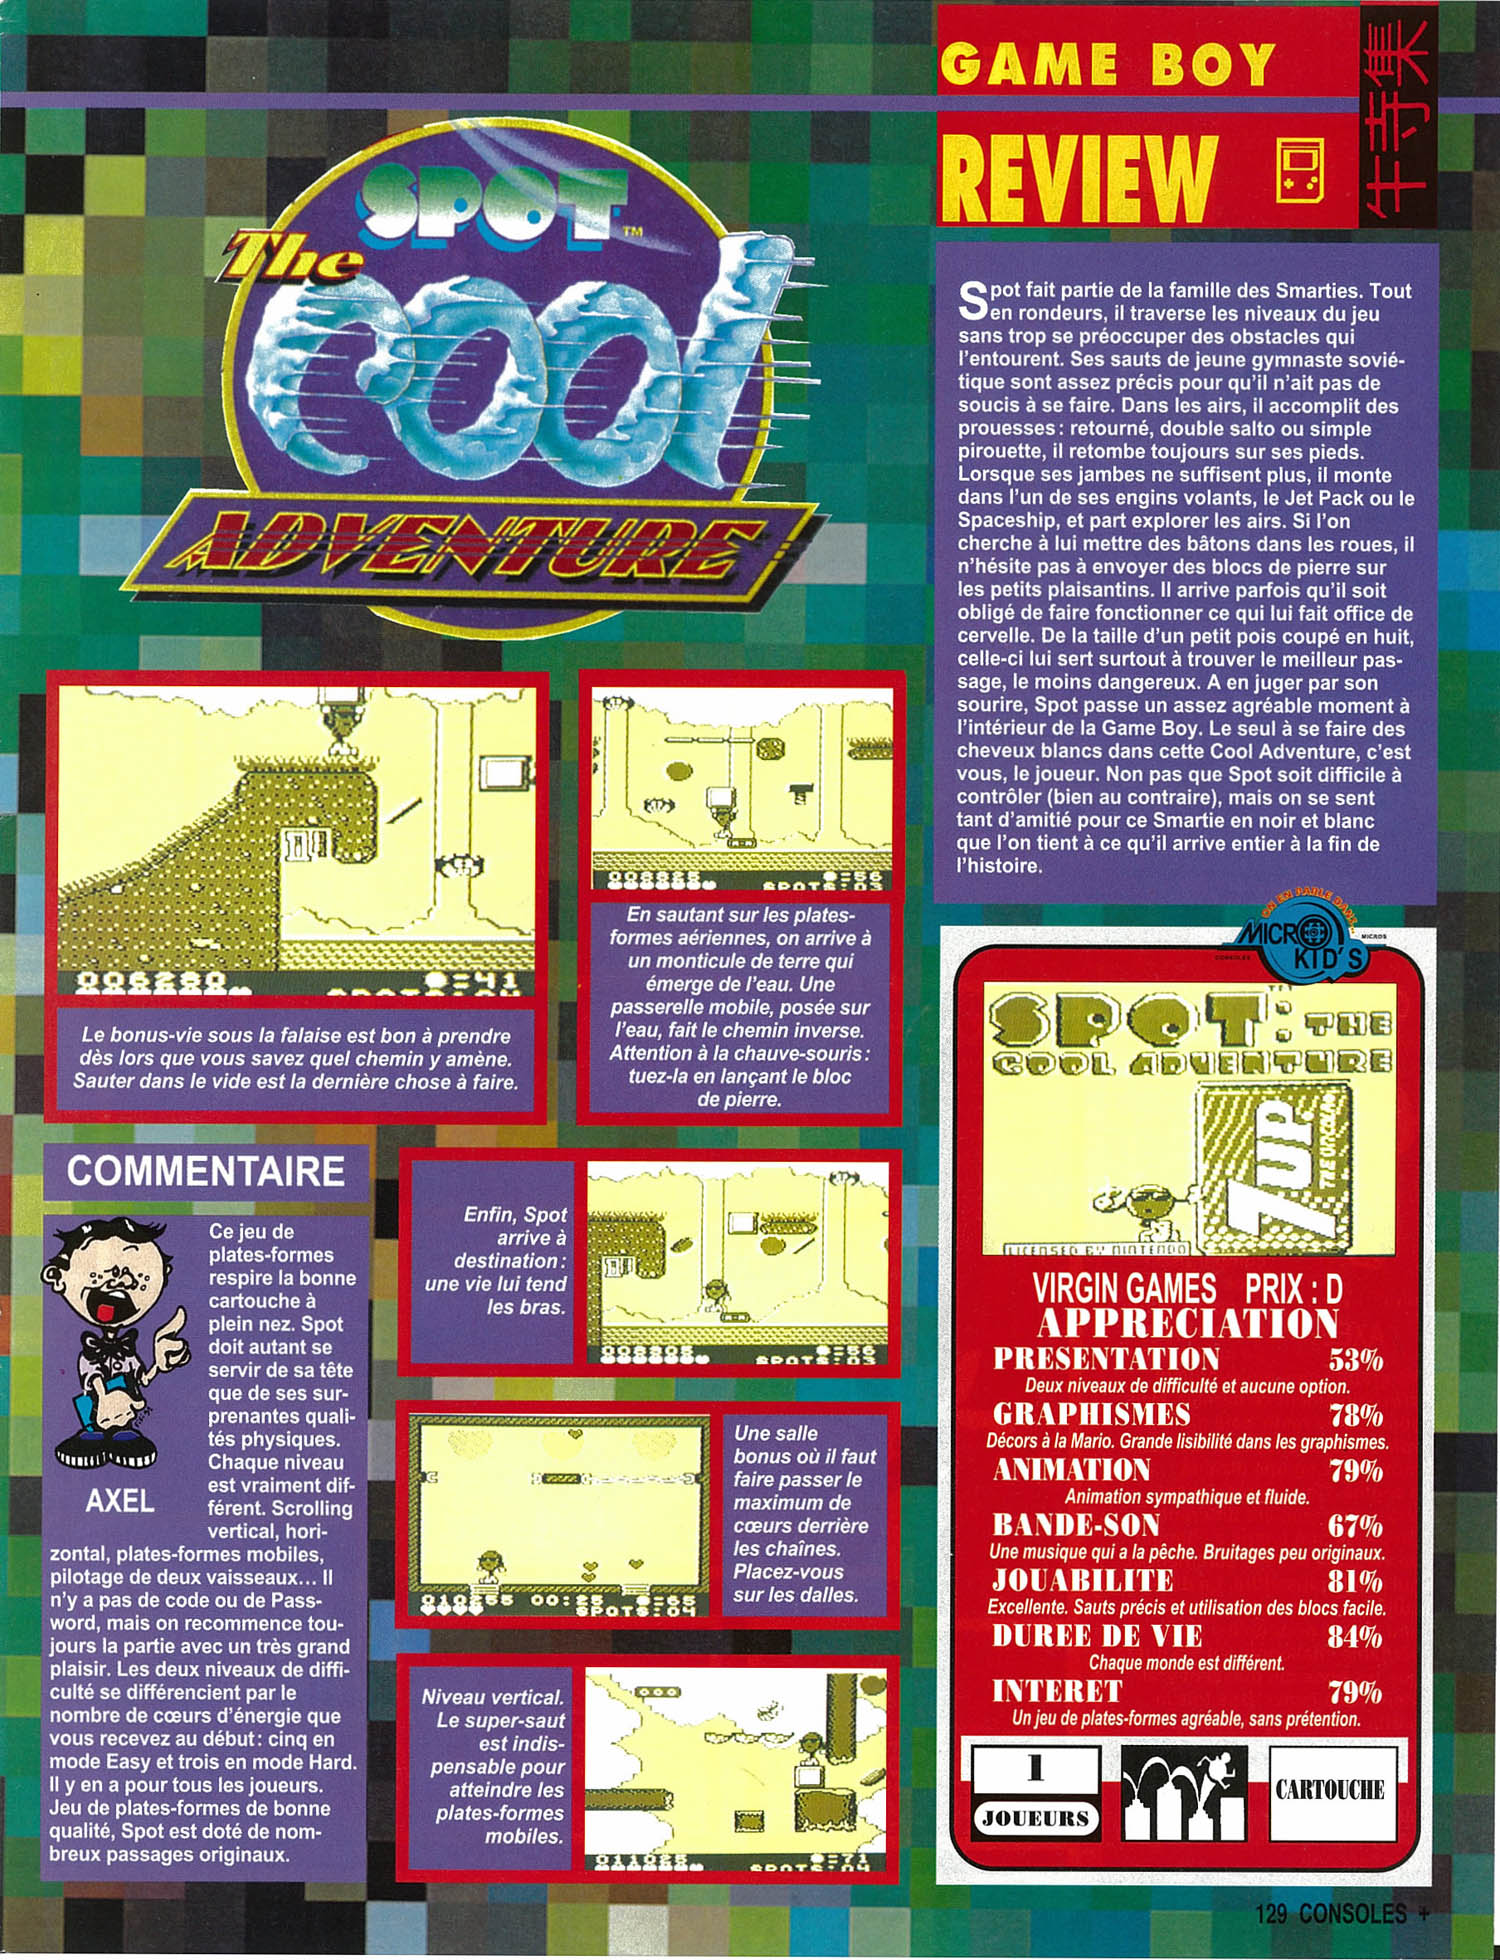 tests//682/Consoles + 019 - Page 129 (avril 1993).jpg